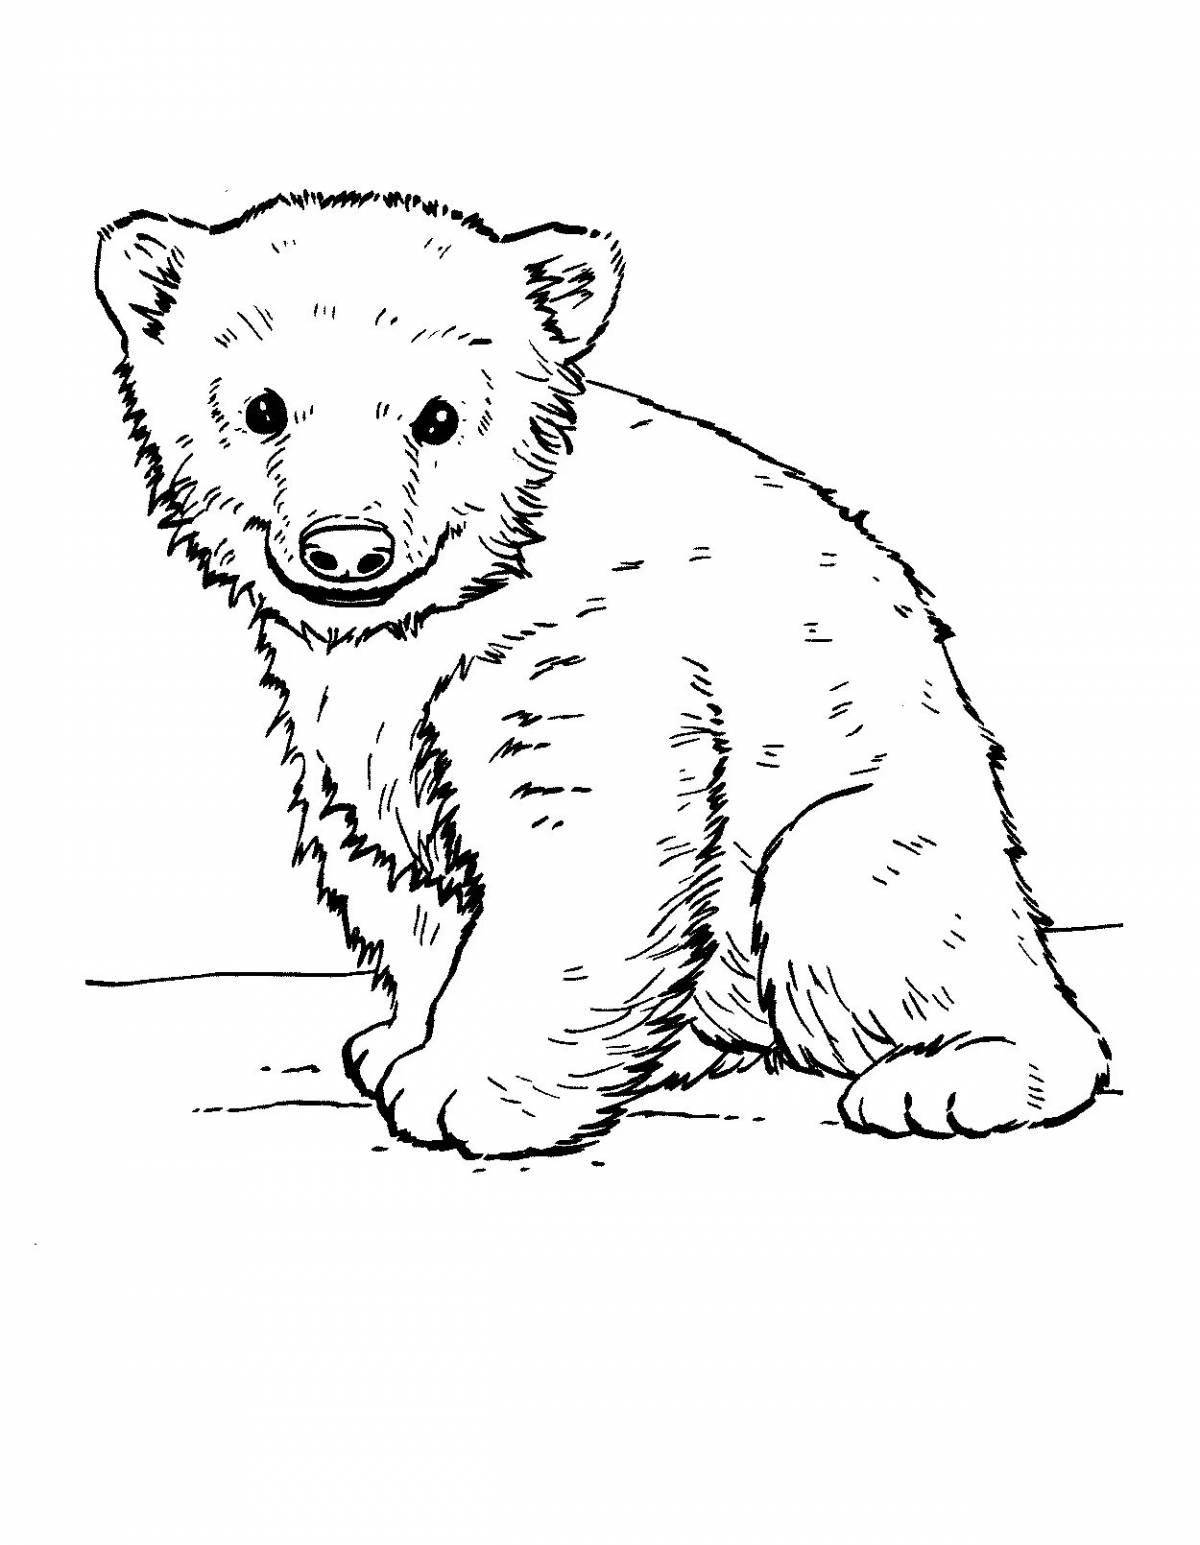 Adorable bear drawing for kids